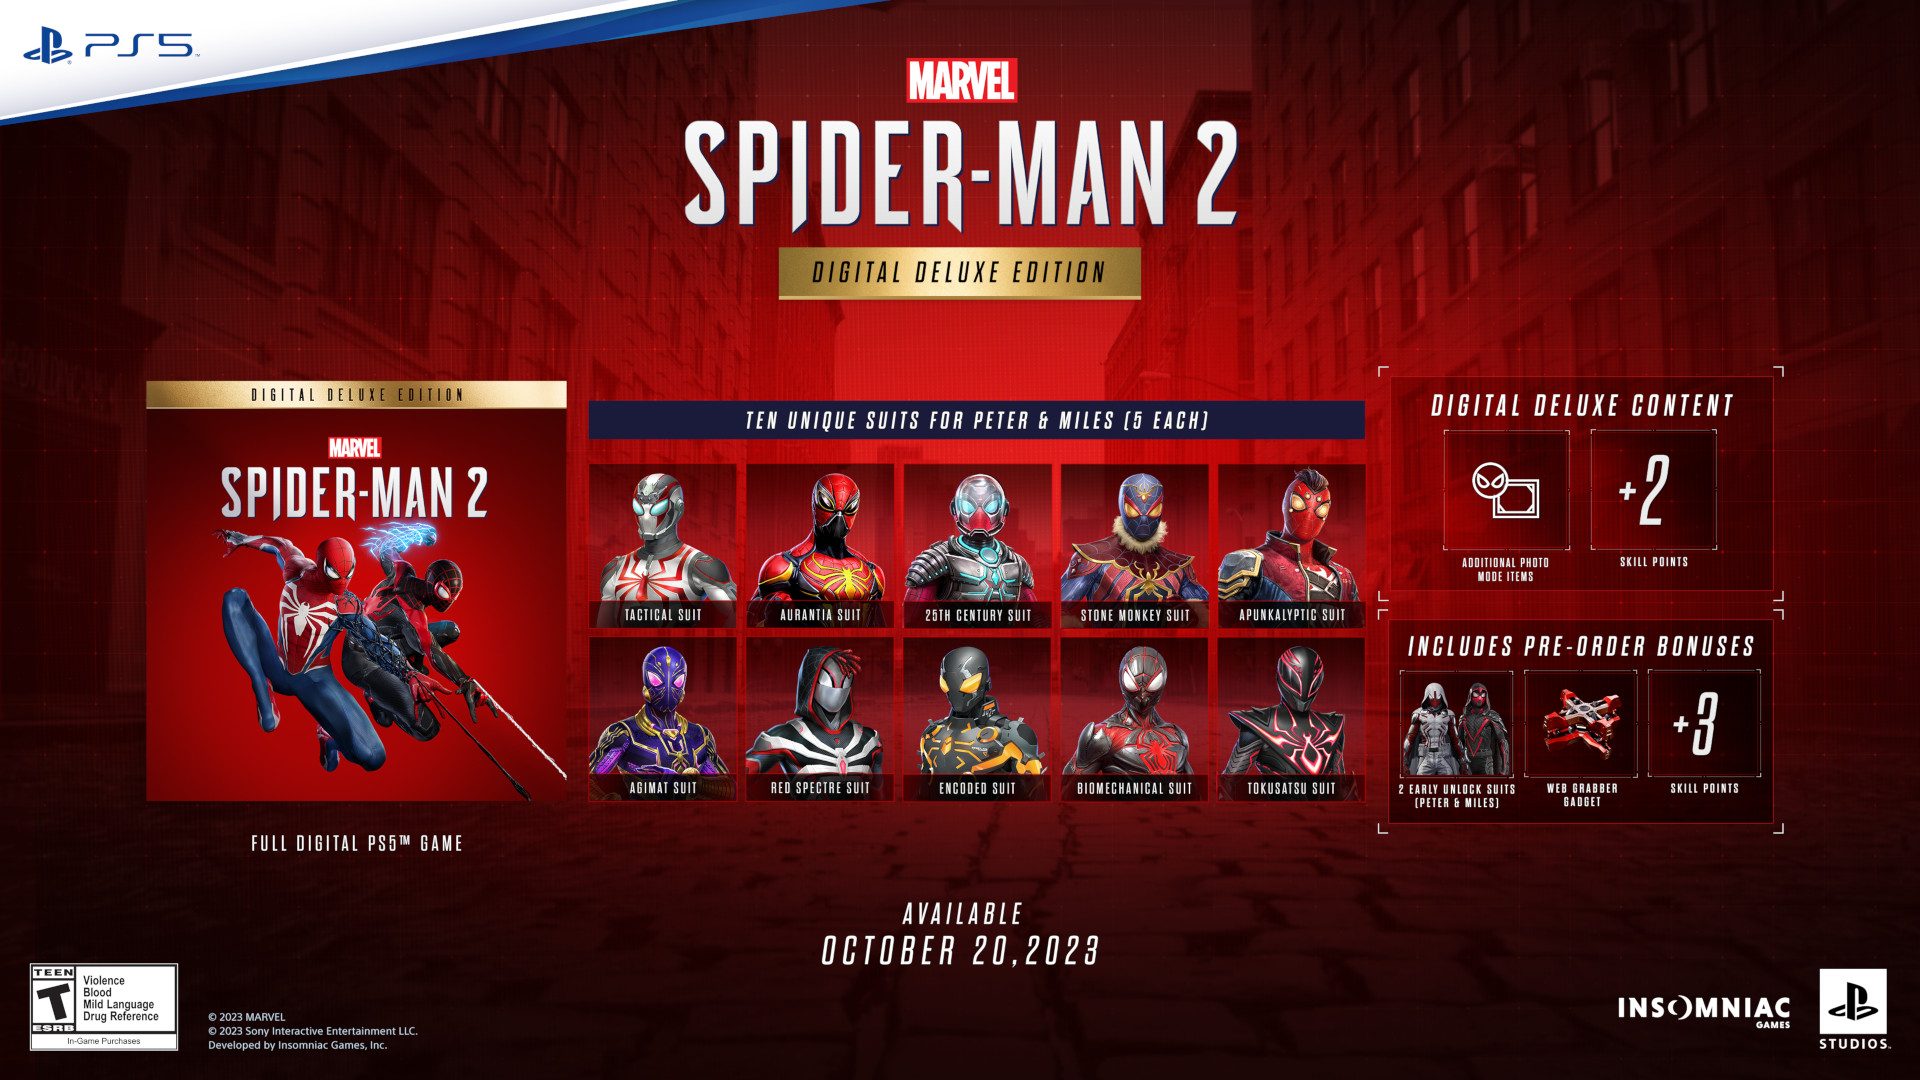 Amazing Spider-Man 2 Live WP (Premium) v2.13 APK Download For Android